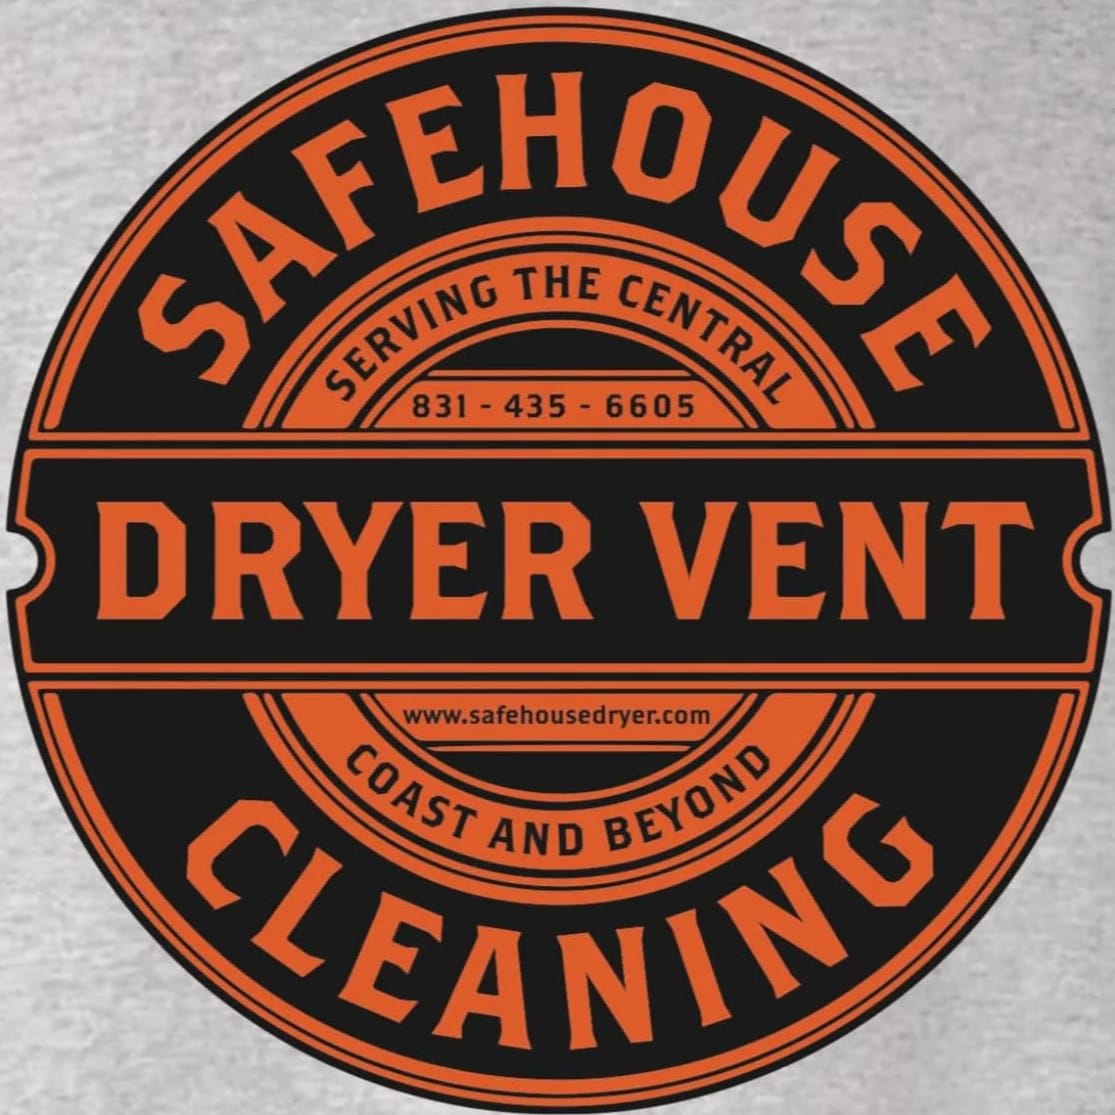 Safehouse Dryer Vent Cleaning